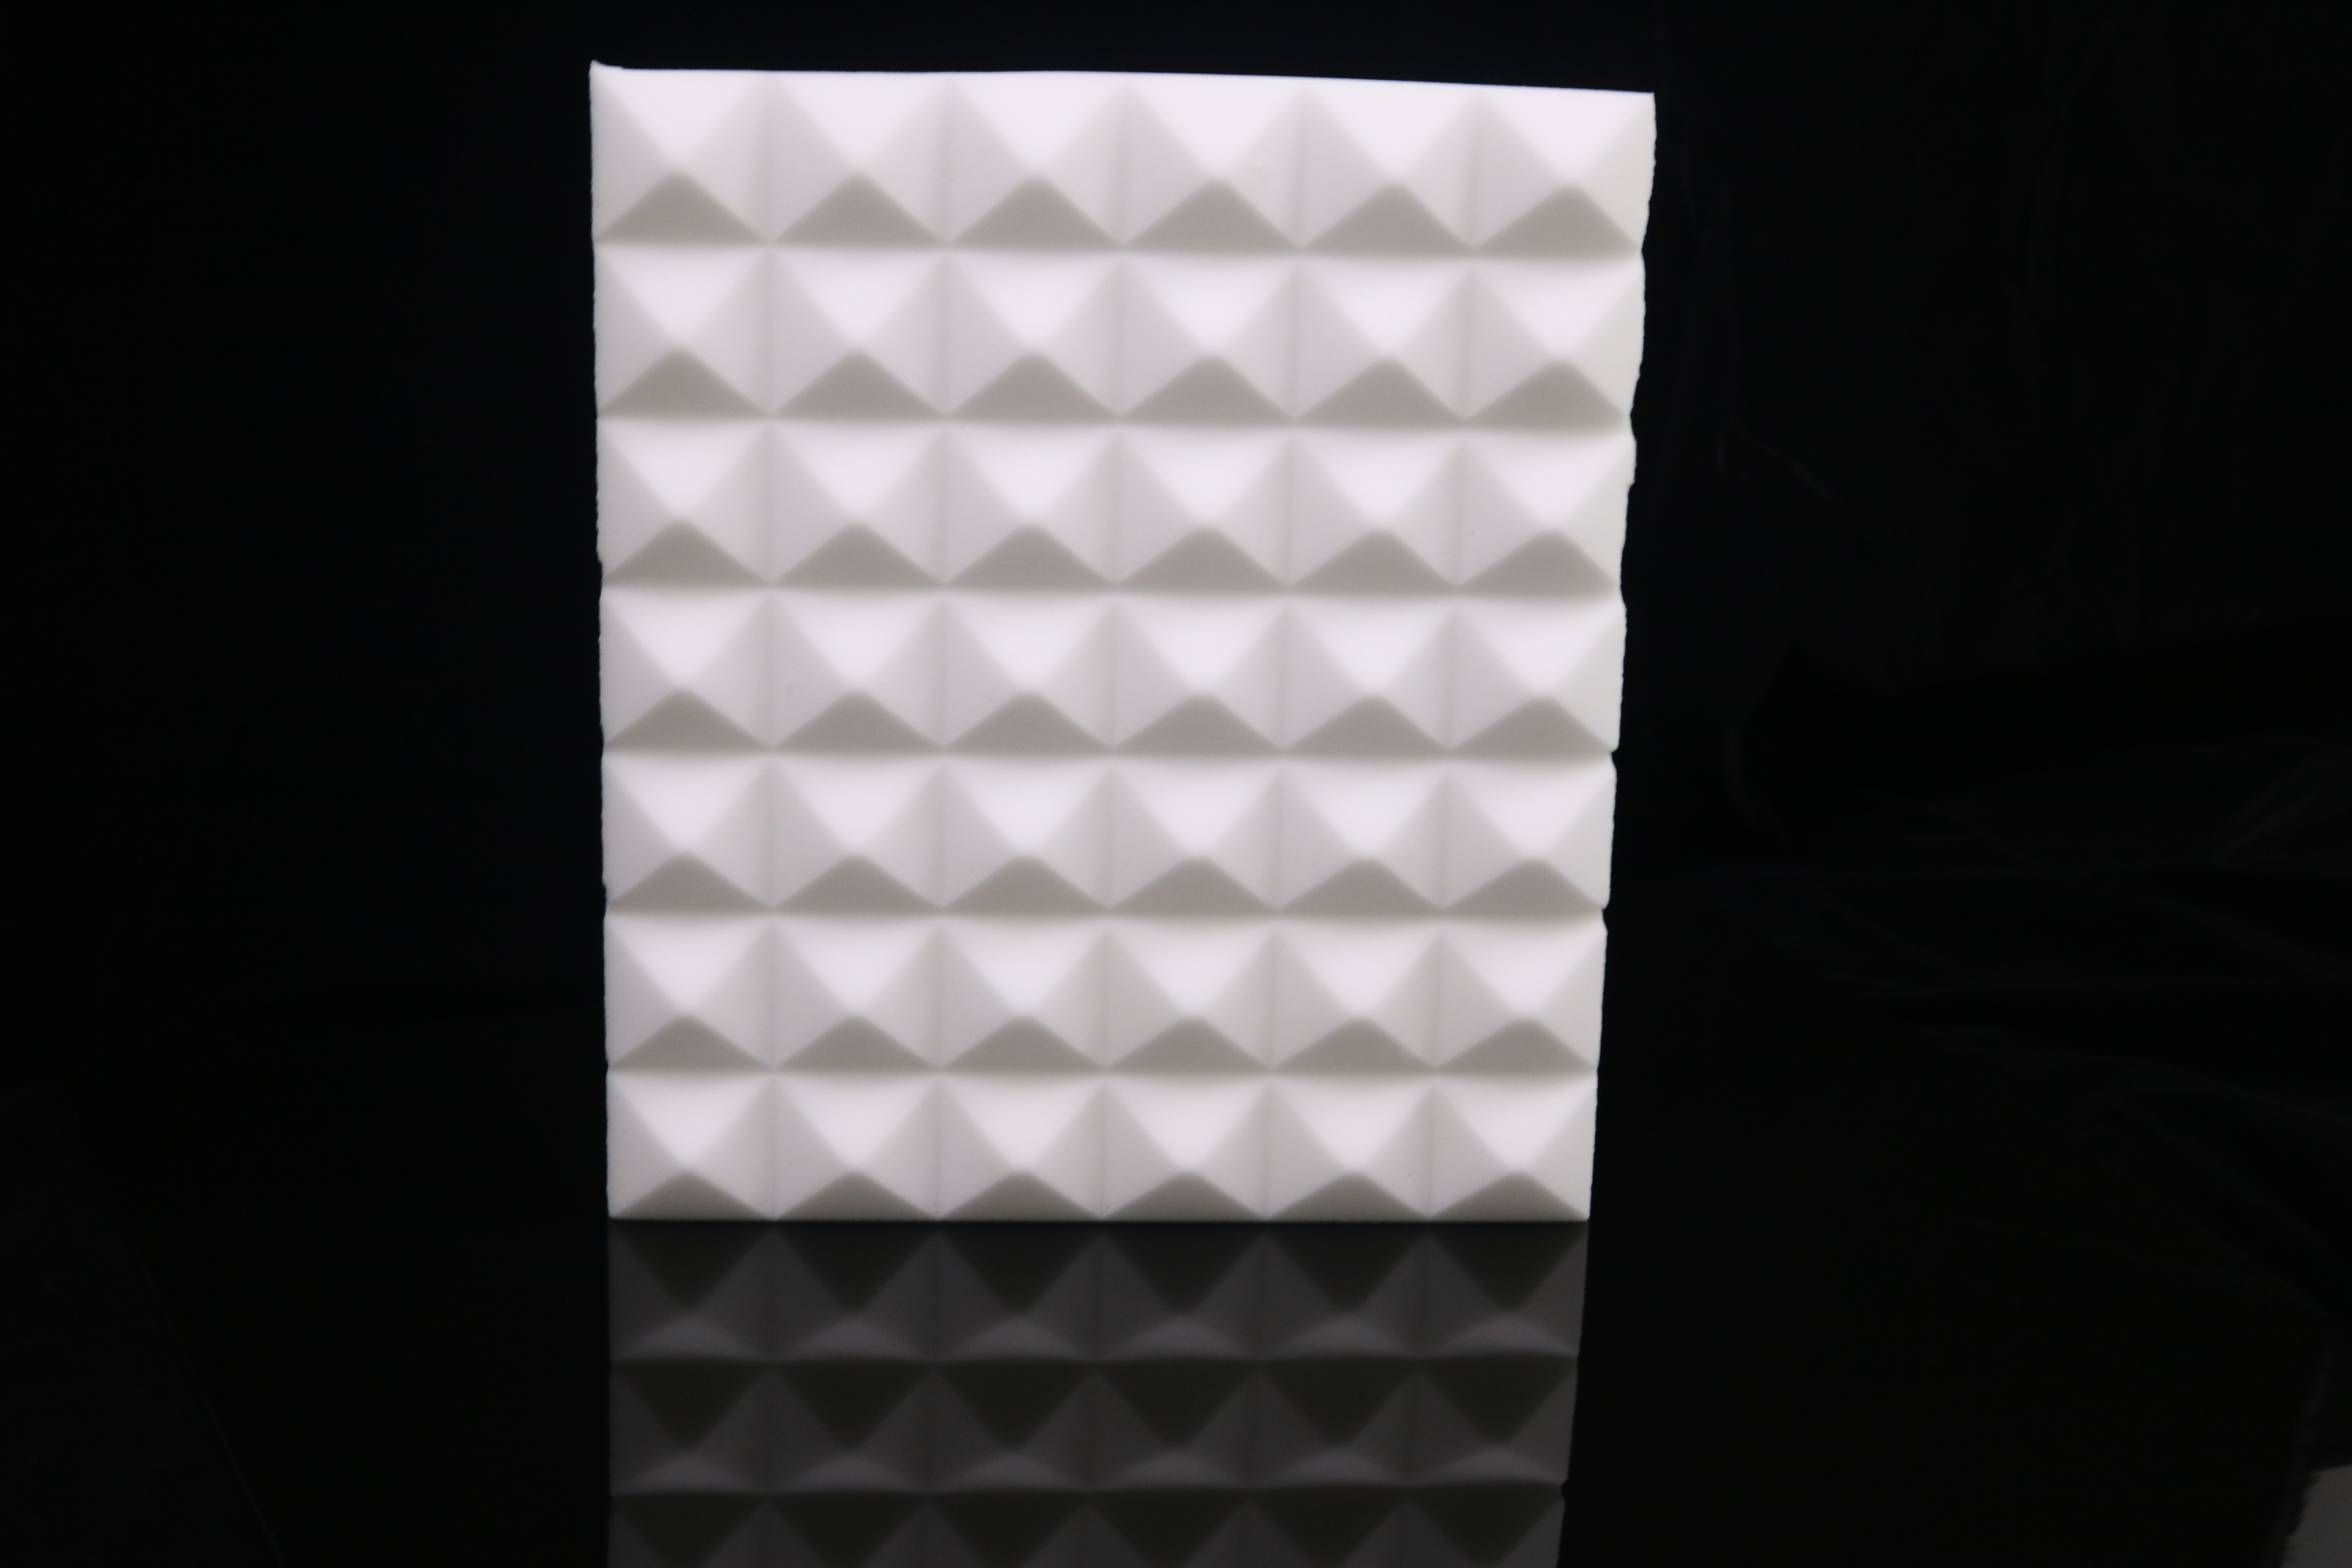   Is sound-absorbing sponge really useful? 